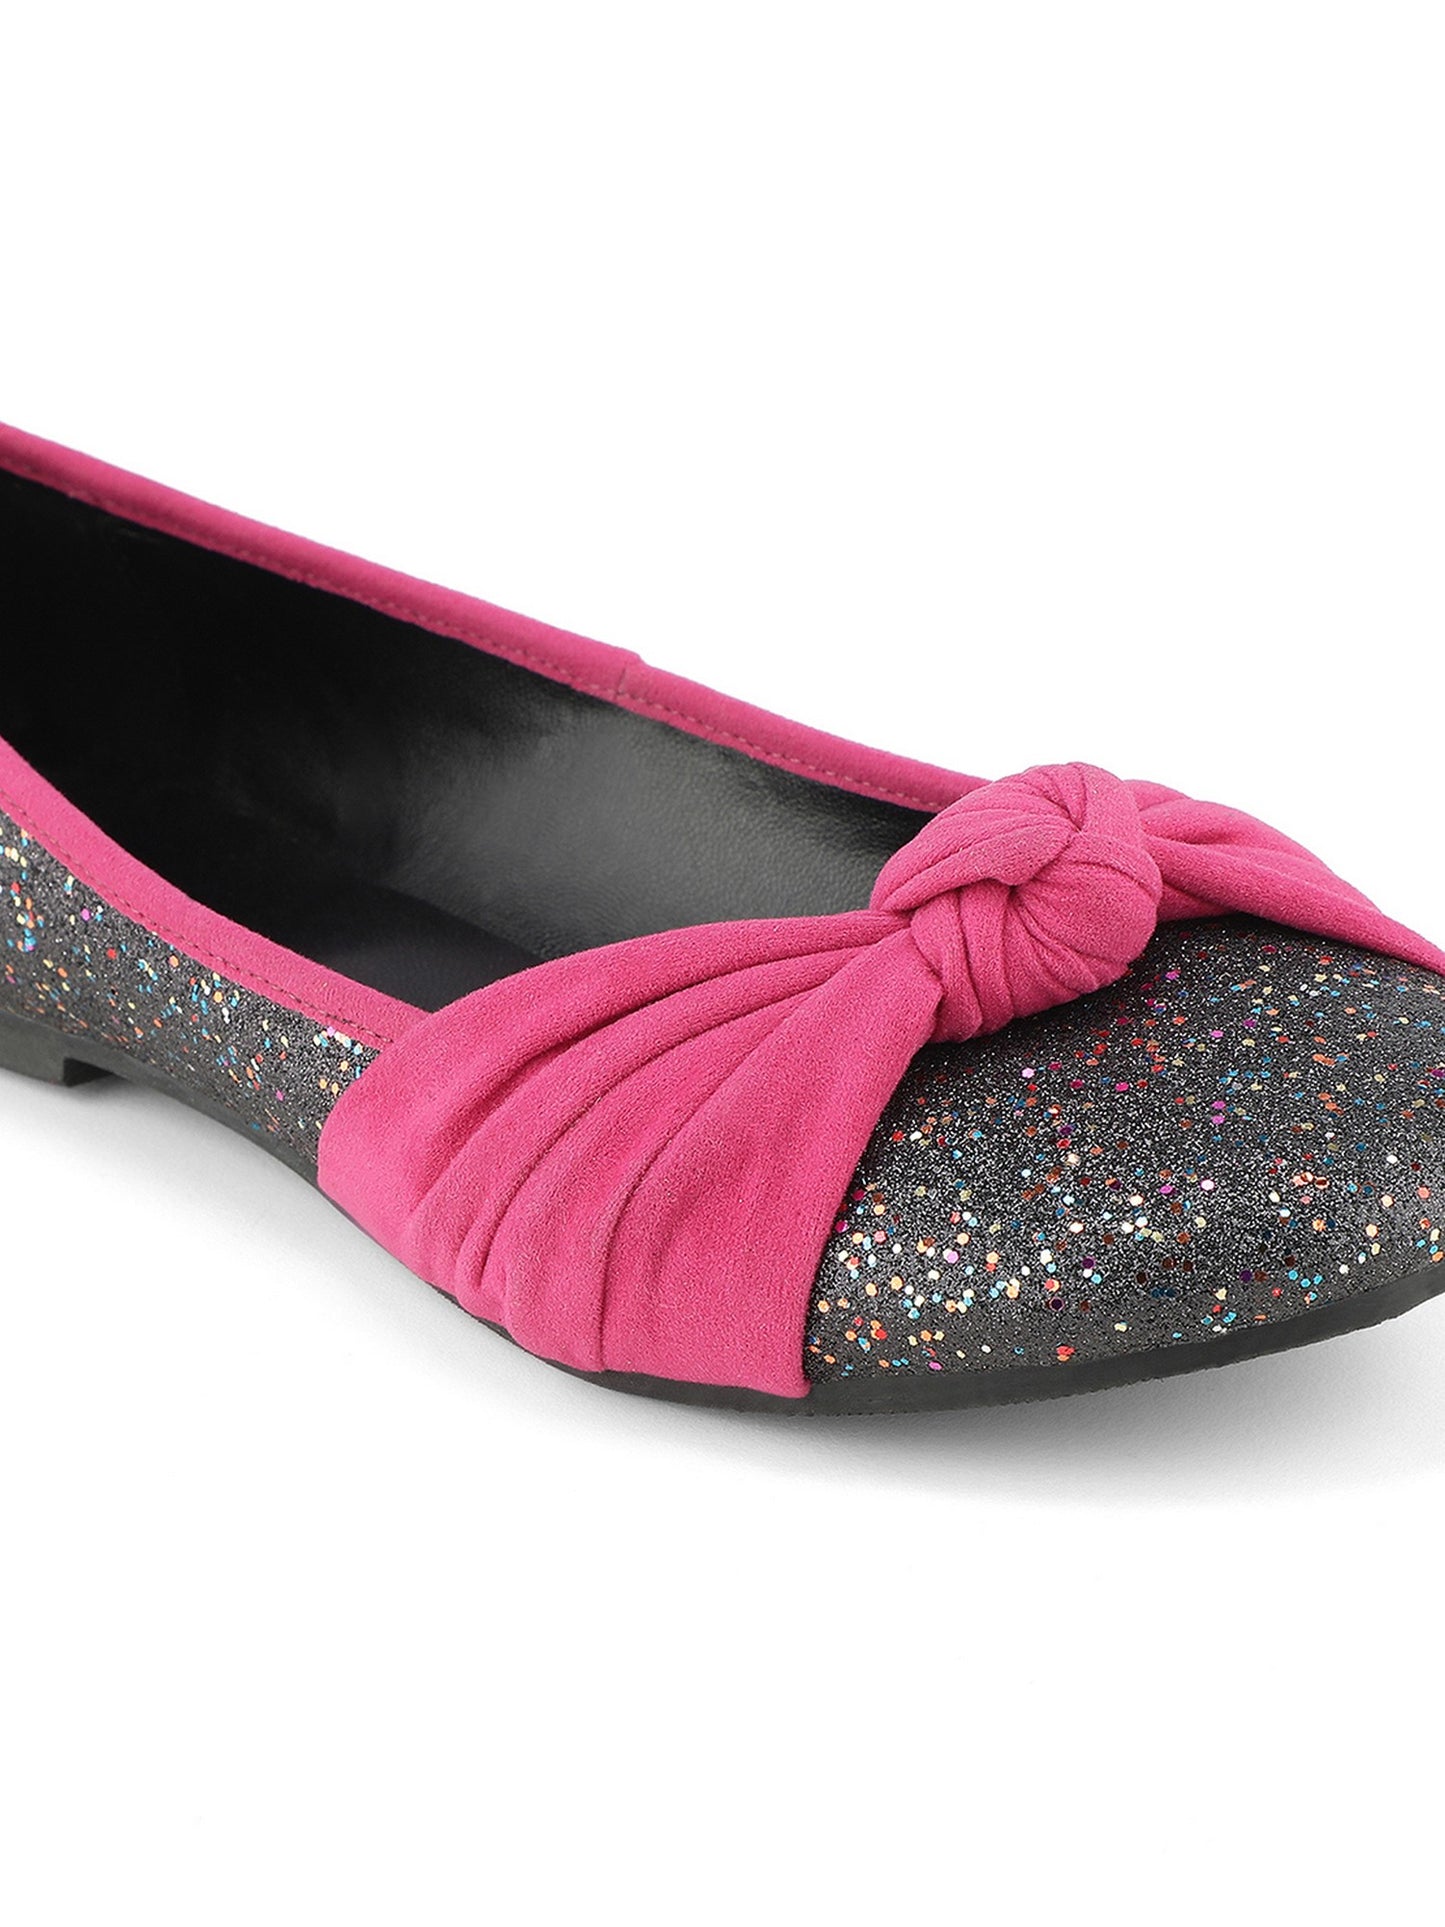 Aady Austin Women Shimmer Grey/Pink Round Toe Flats Belly (AUSF20065)